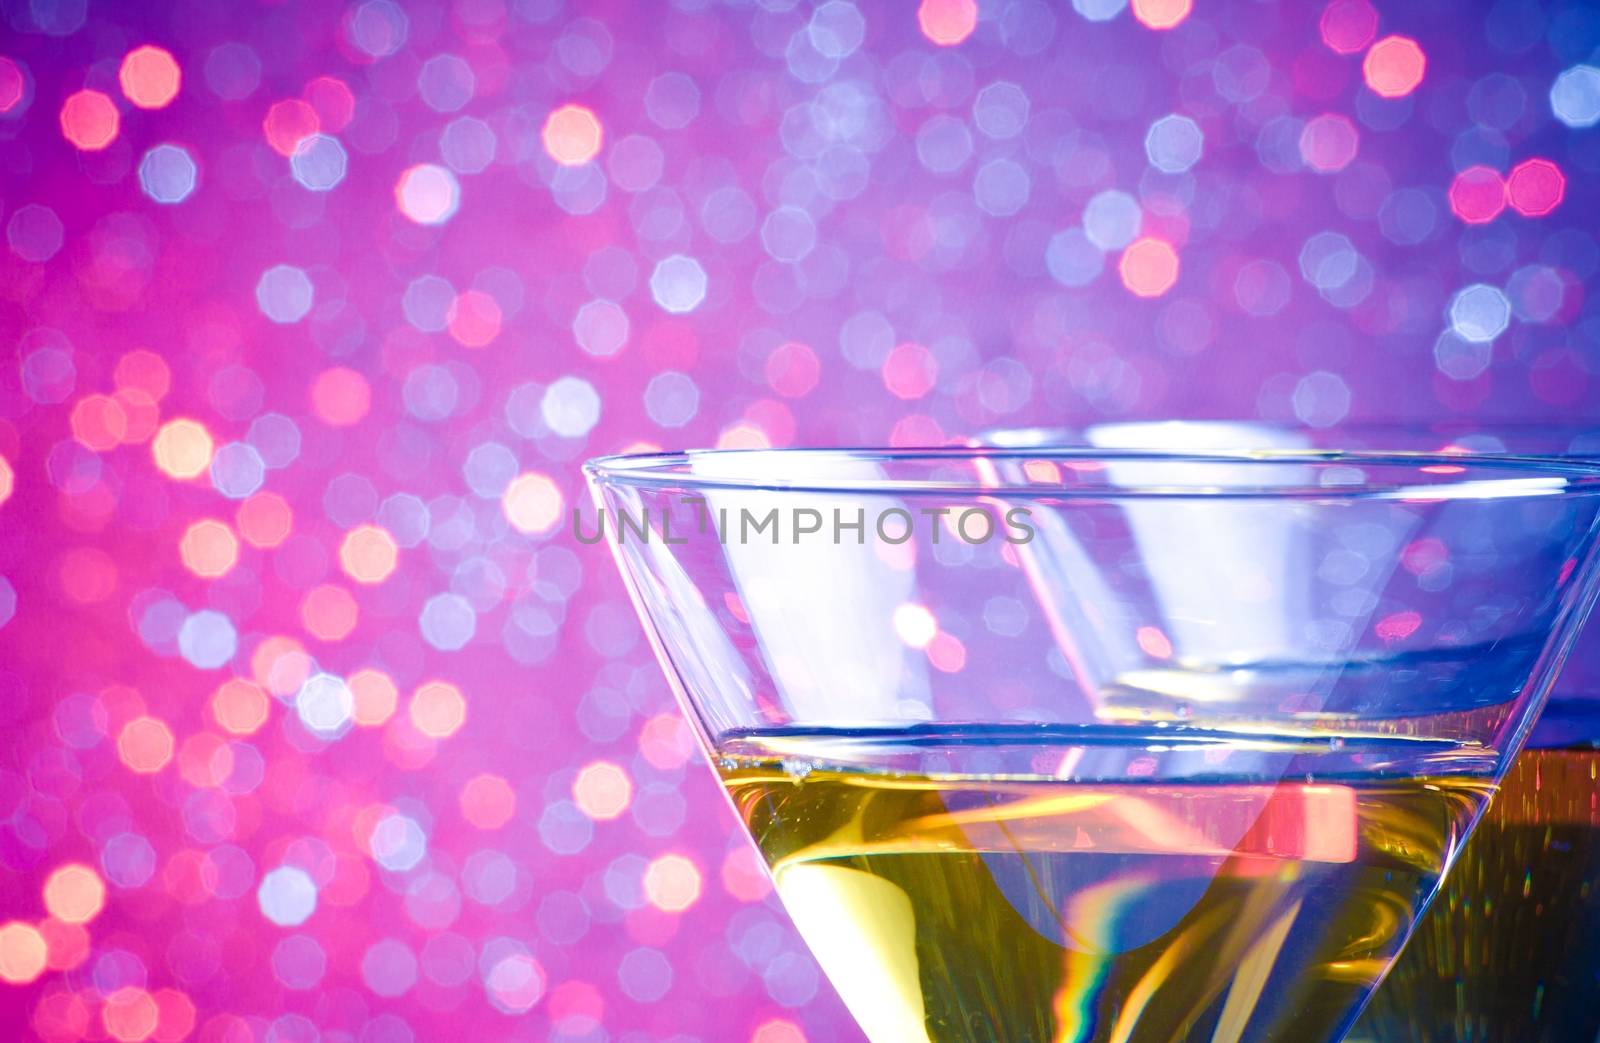 detail of two glasses of cocktail on blue and violet tint light bokeh background on bar table with space for text